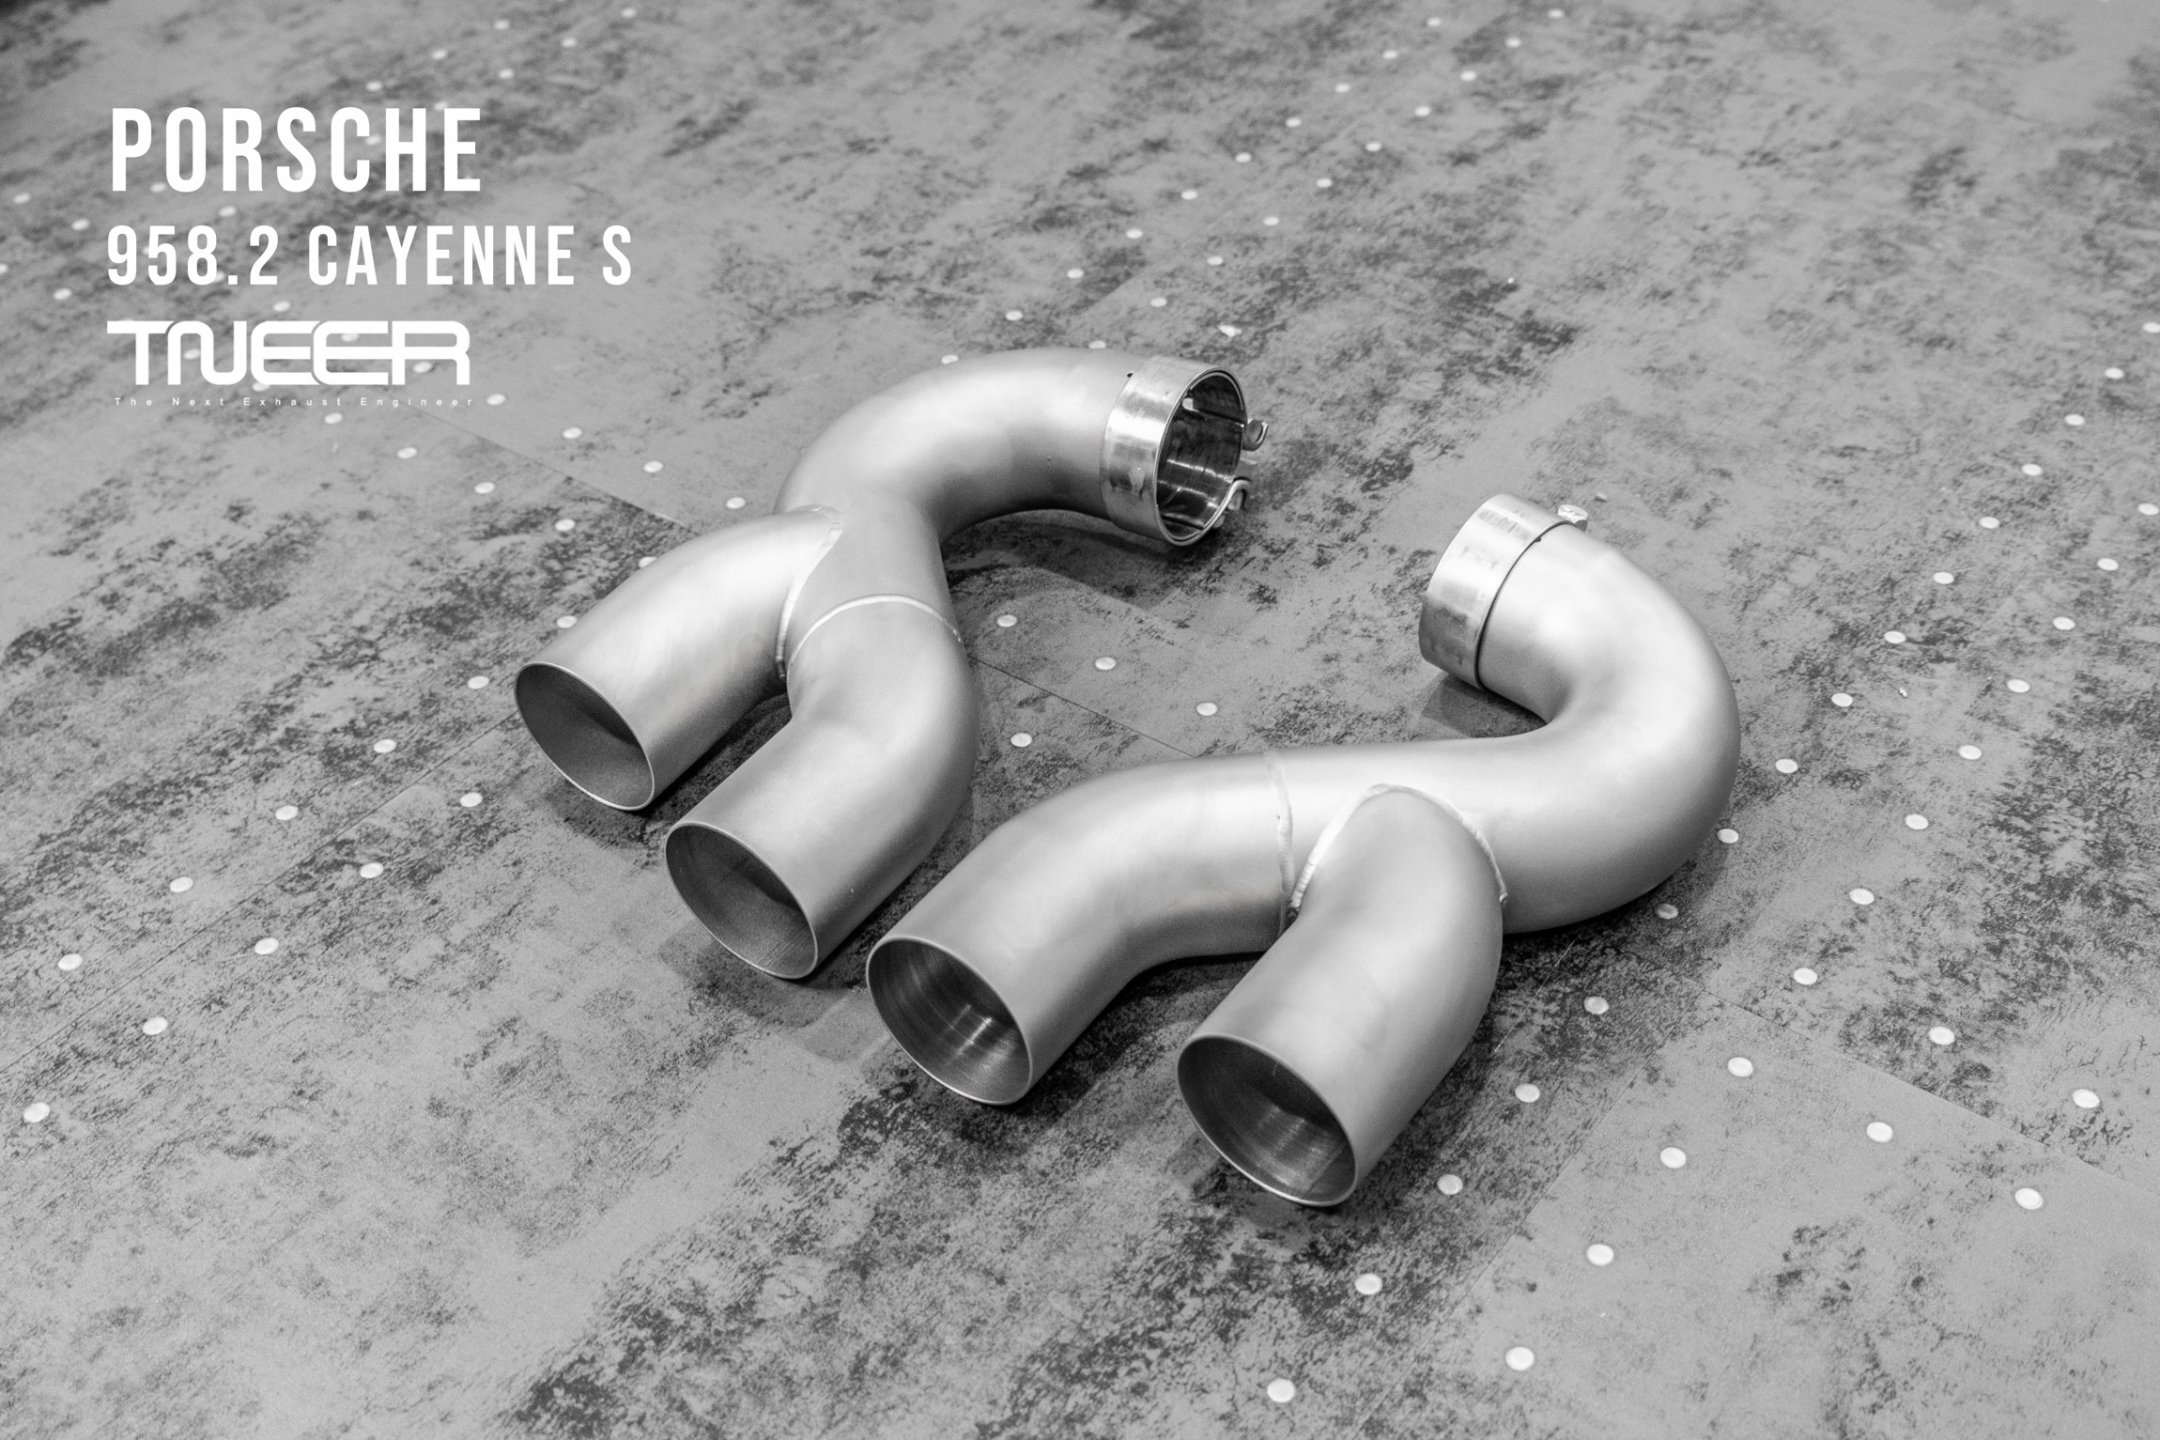 BMW F90 (M5) TNEER Downpipes & Components